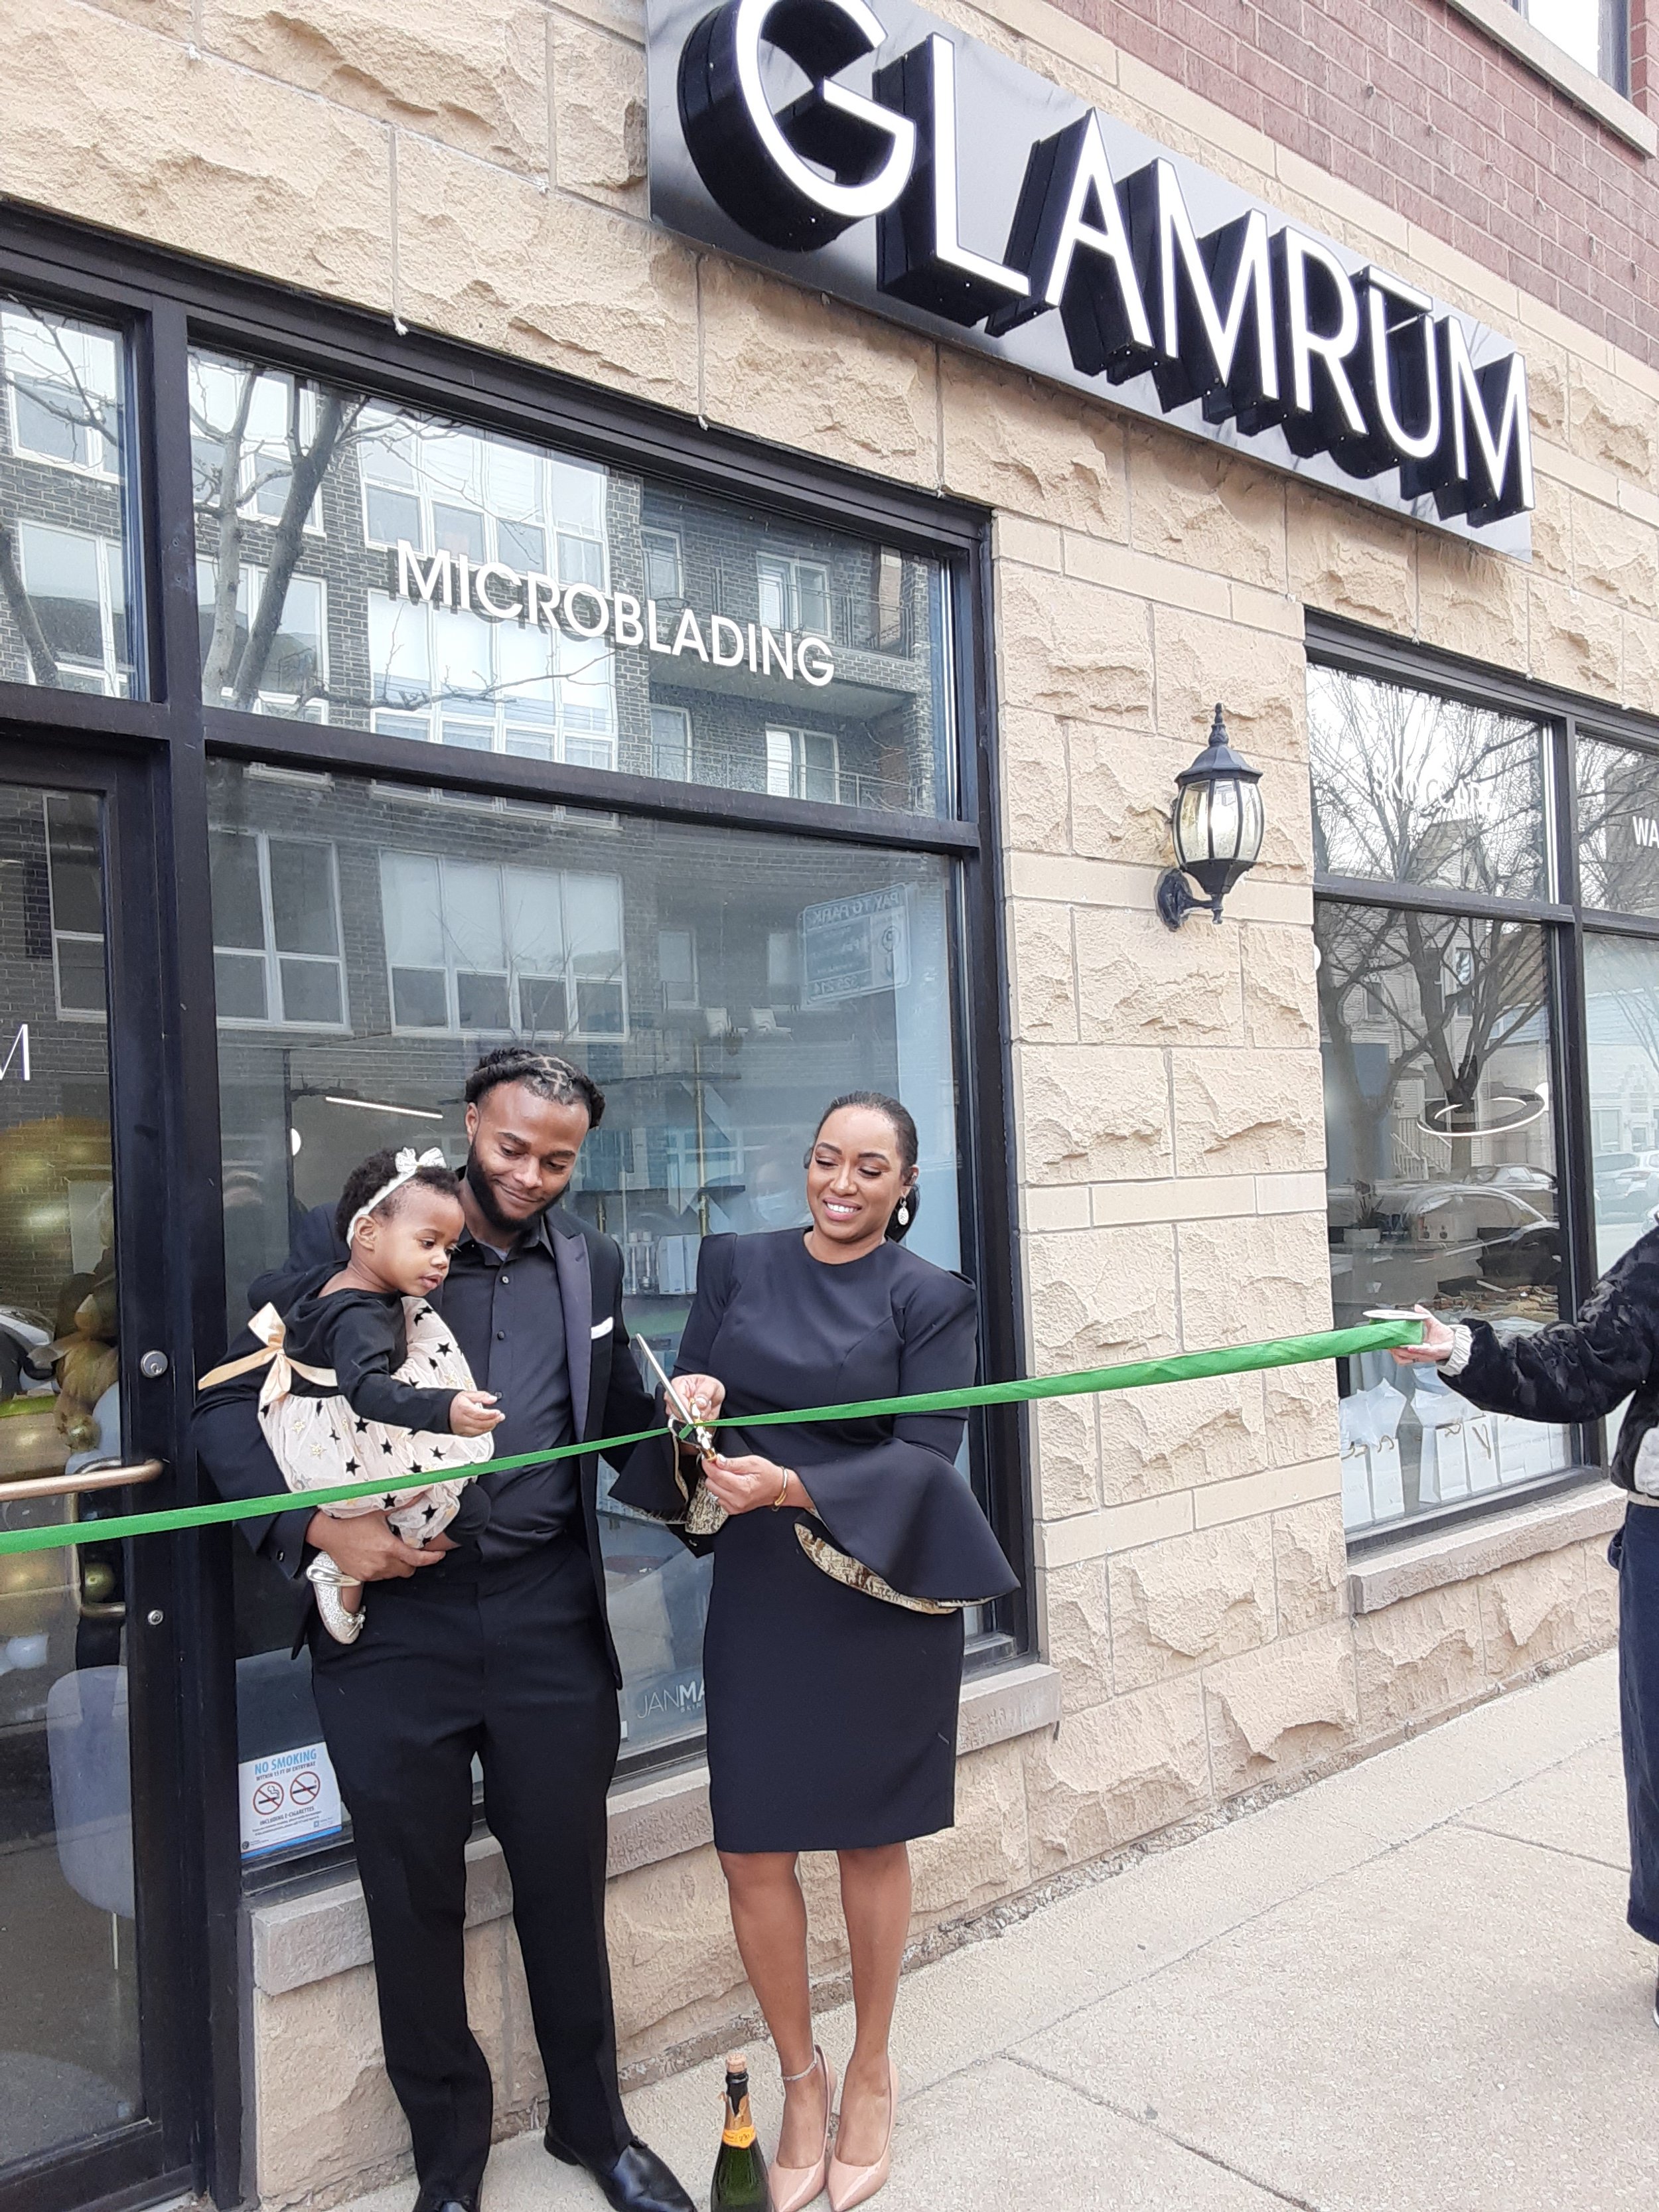 Glamrūm gets a warm welcome &amp; Official Ribbon Cutting